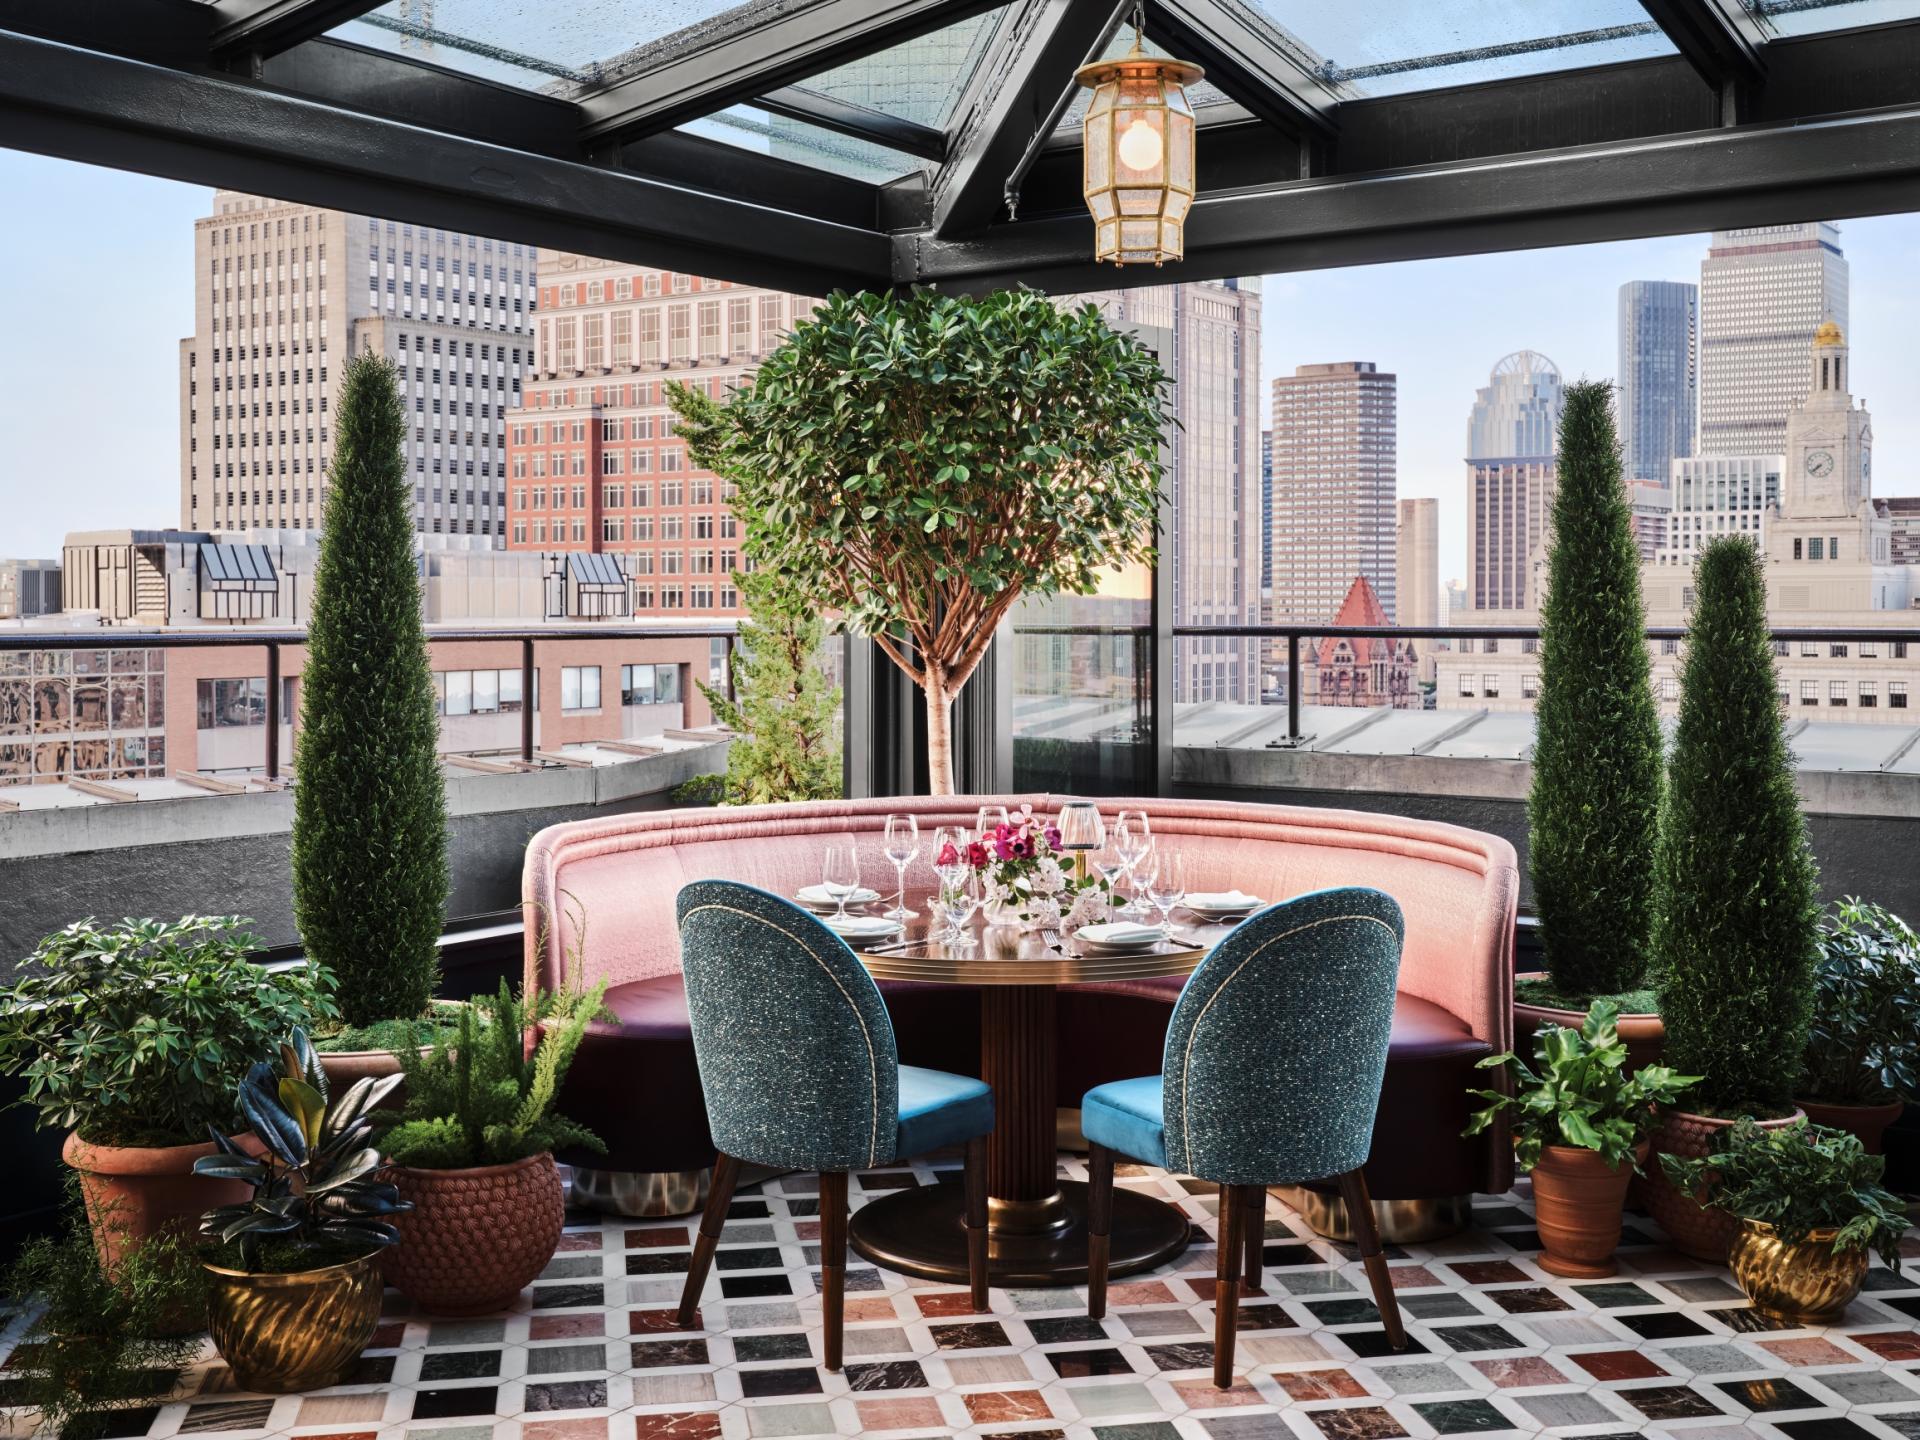 A table at Contessa, the rooftop restaurant at The Newbury Boston